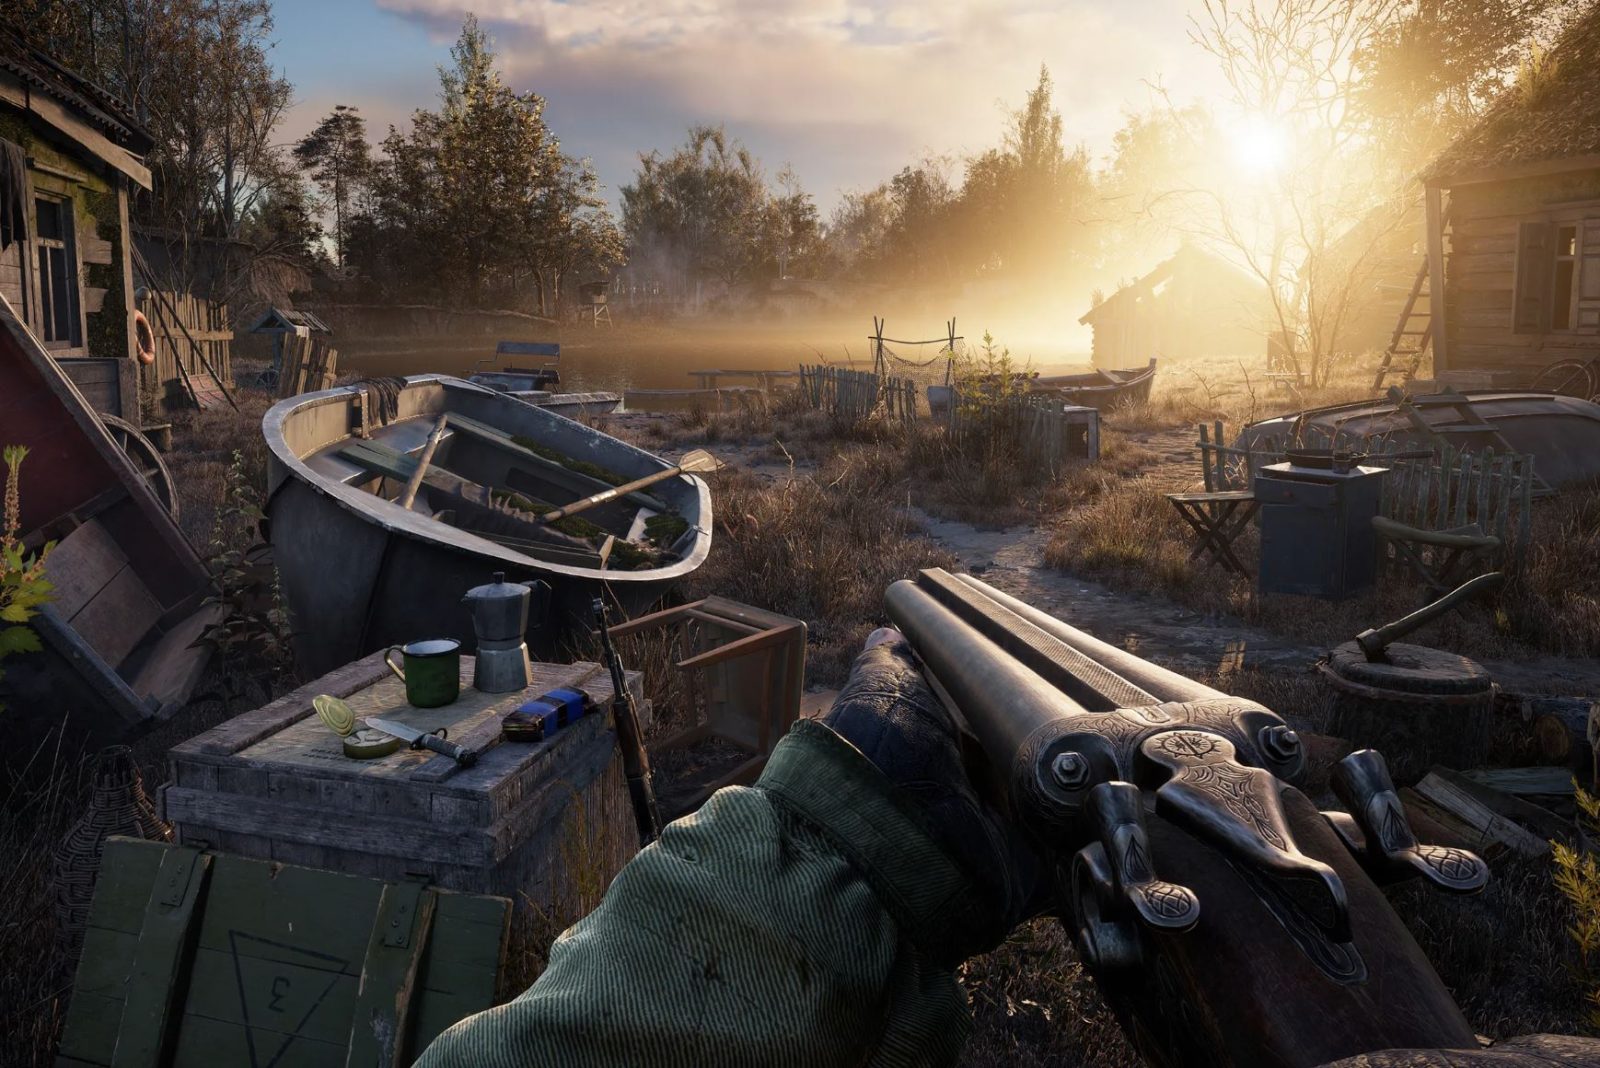 The game's visual do look stunning and is powered by Unreal Engine 5.